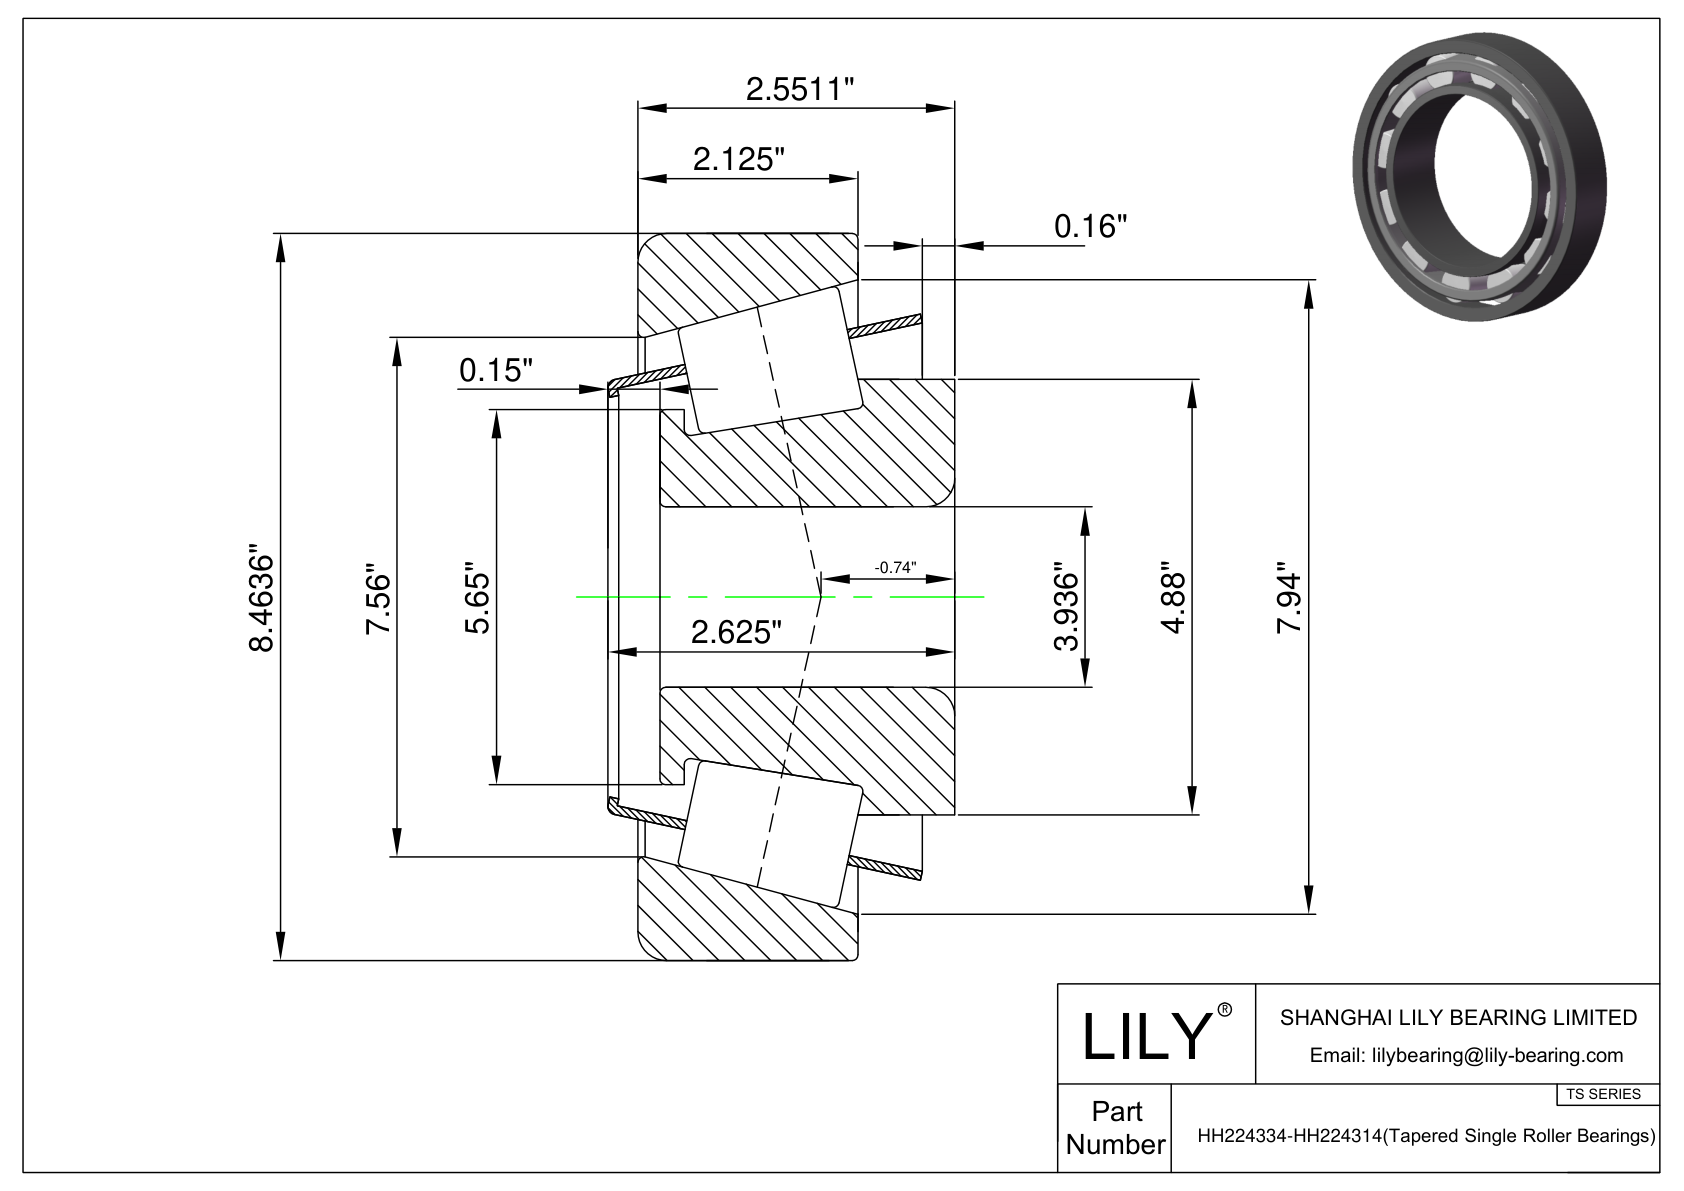 HH224334-HH224314 TS (Tapered Single Roller Bearings) (Imperial) cad drawing